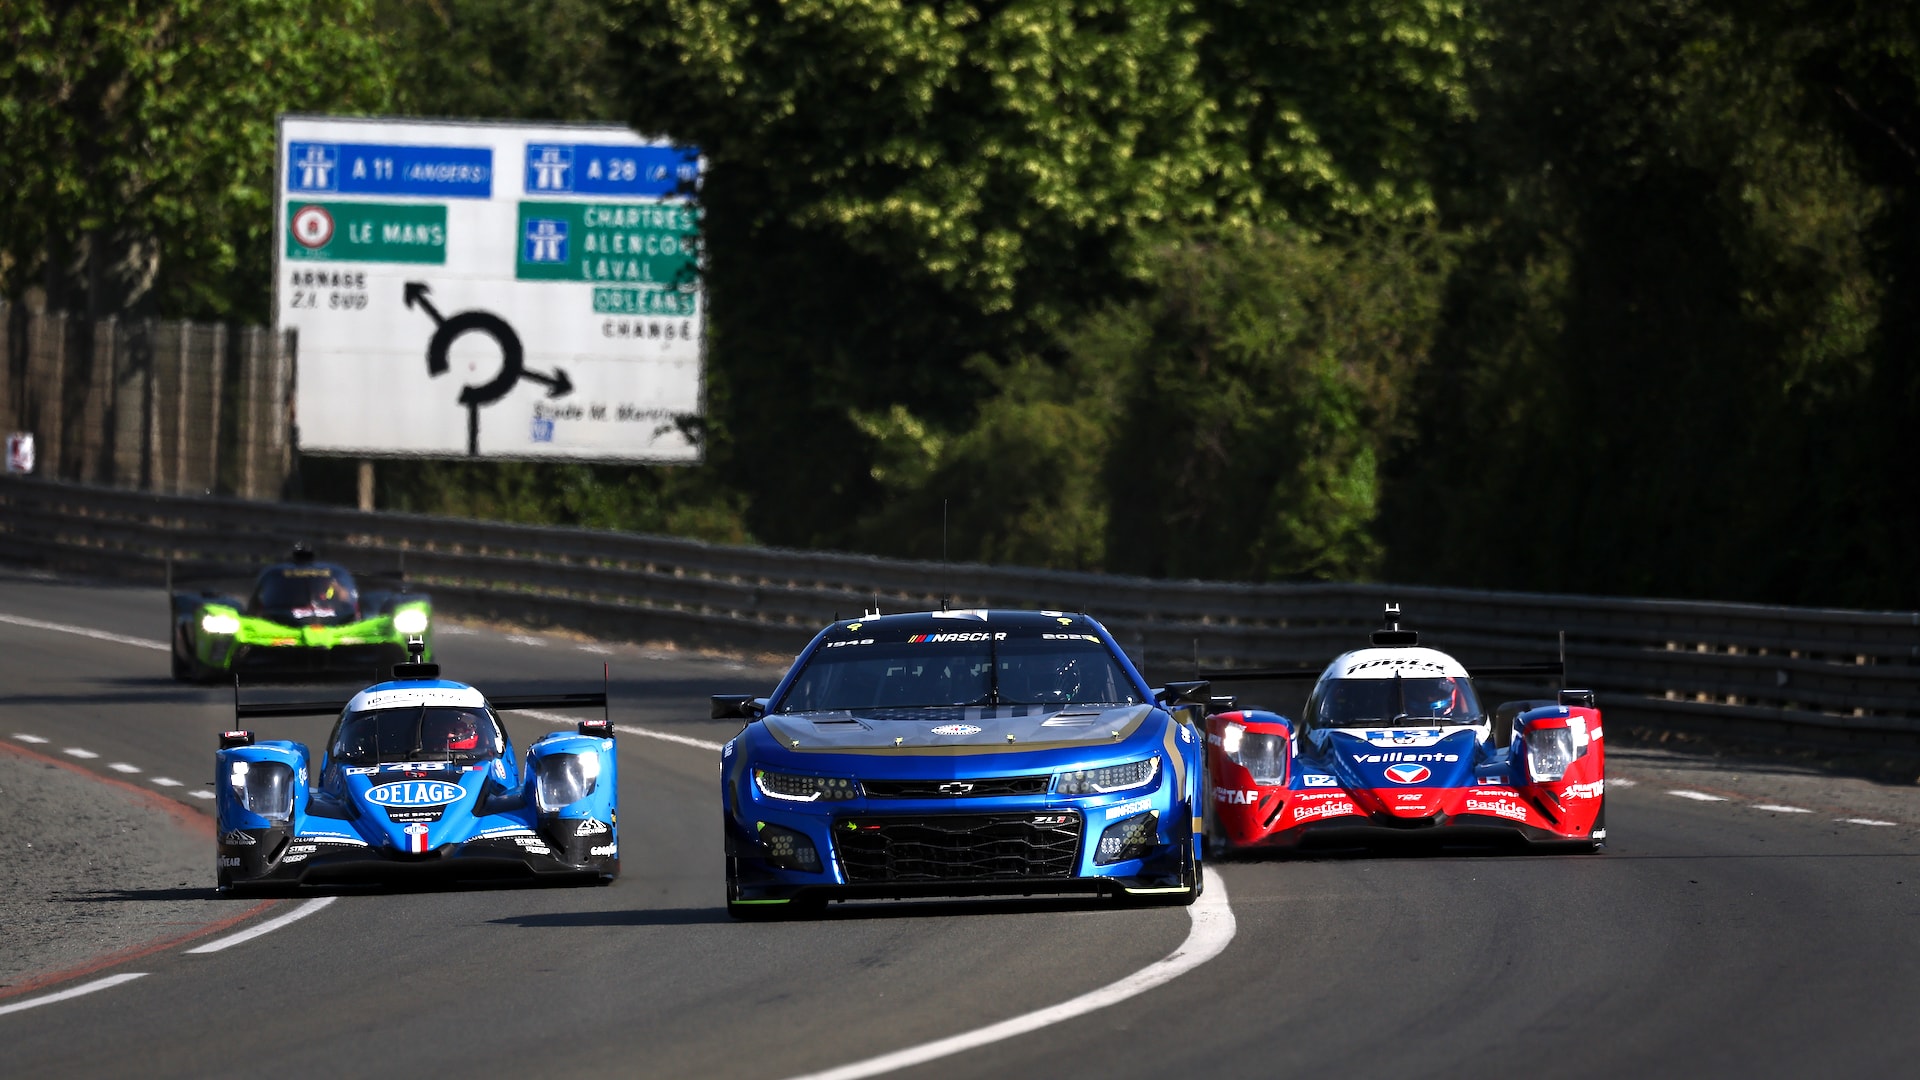 Why is a Chevy NASCAR racing at Le Mans this weekend?